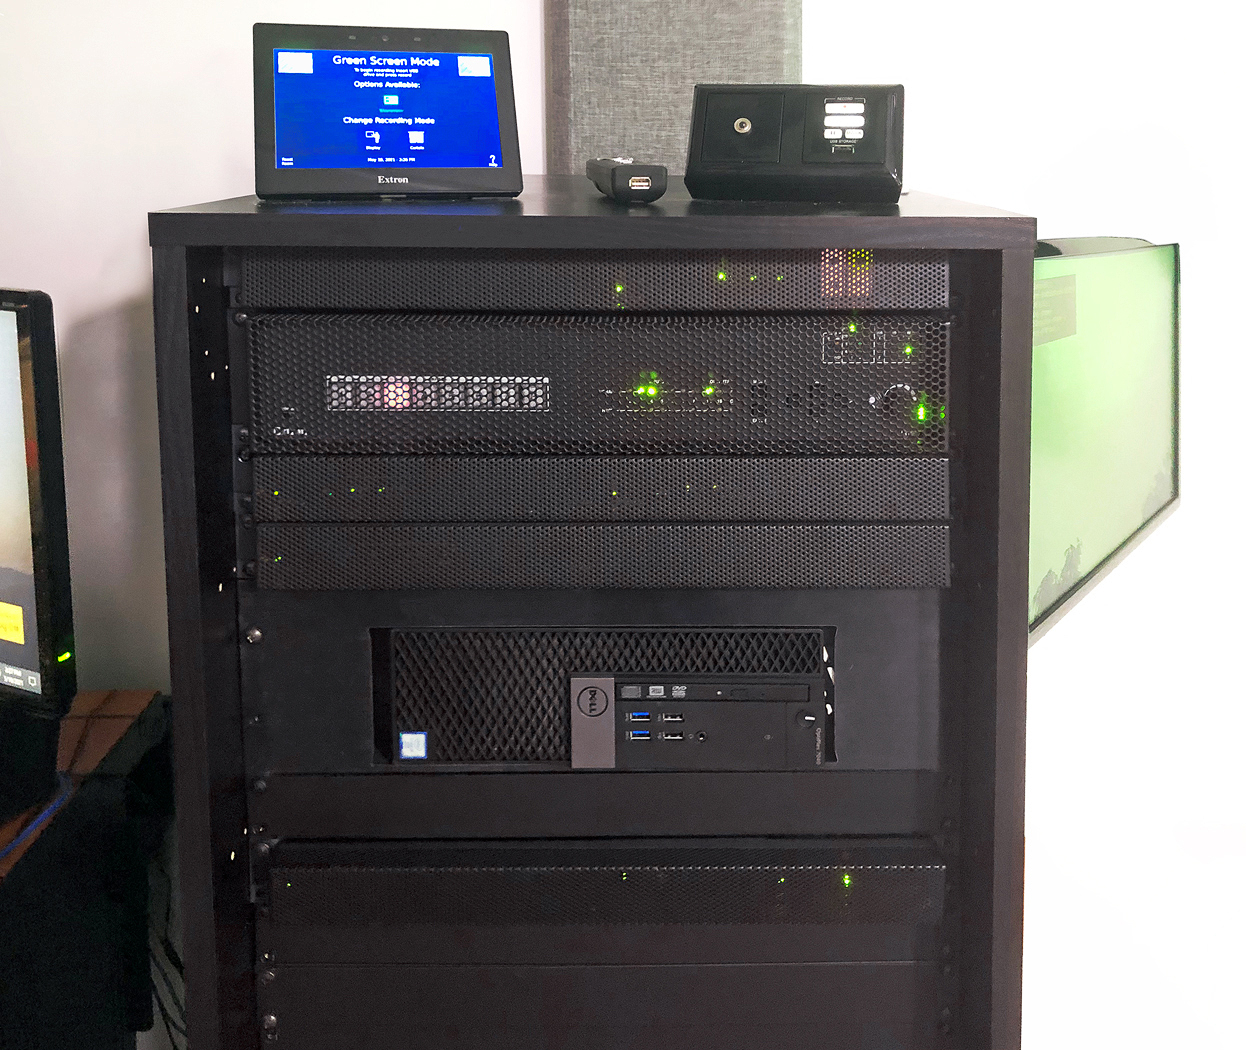 Main AV equipment rack. TLP Pro 725T 7" TouchLink Pro touchpanel, RCP 101 remote control panel, and presenter's remote control are on top of the rack. Visible within the rack are the IN1608 xi scaling presentation switcher and the PC. A confidence monitor swings out from the right side of the rack.